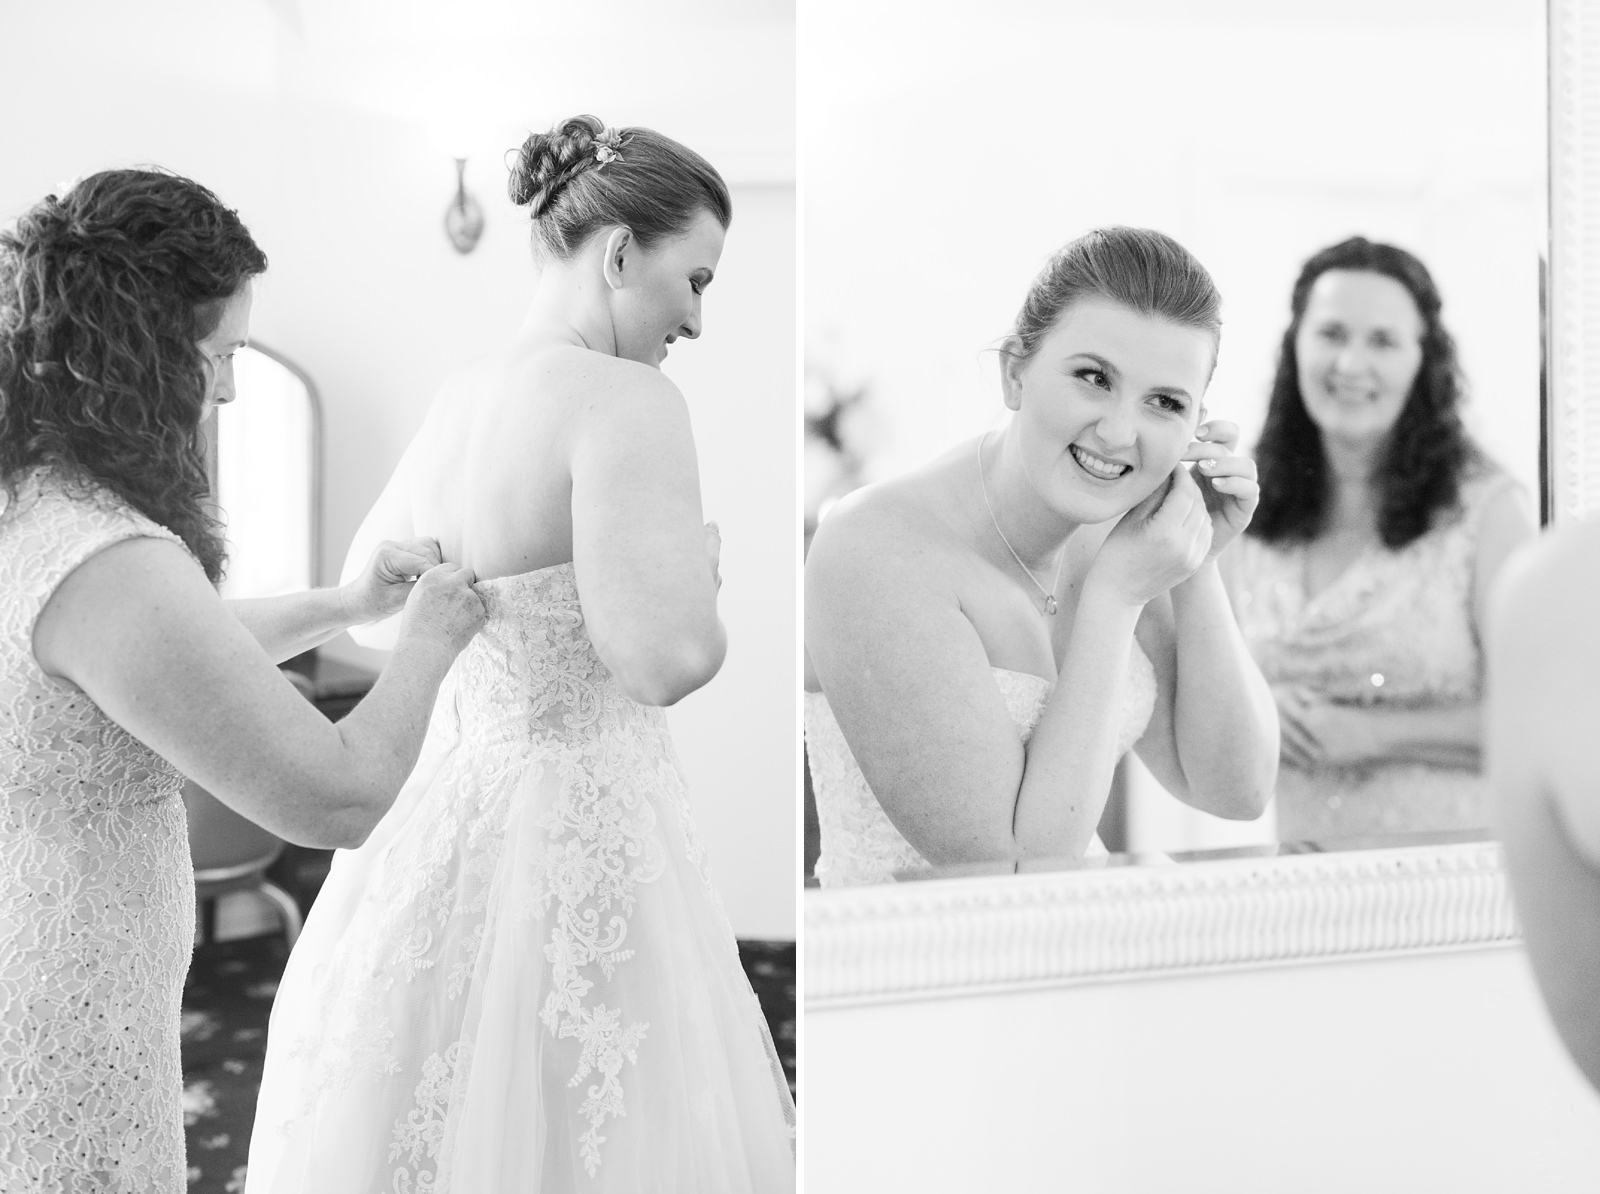 Getting Ready Photos on Their Wedding Day by Adrienne and Dani Photography